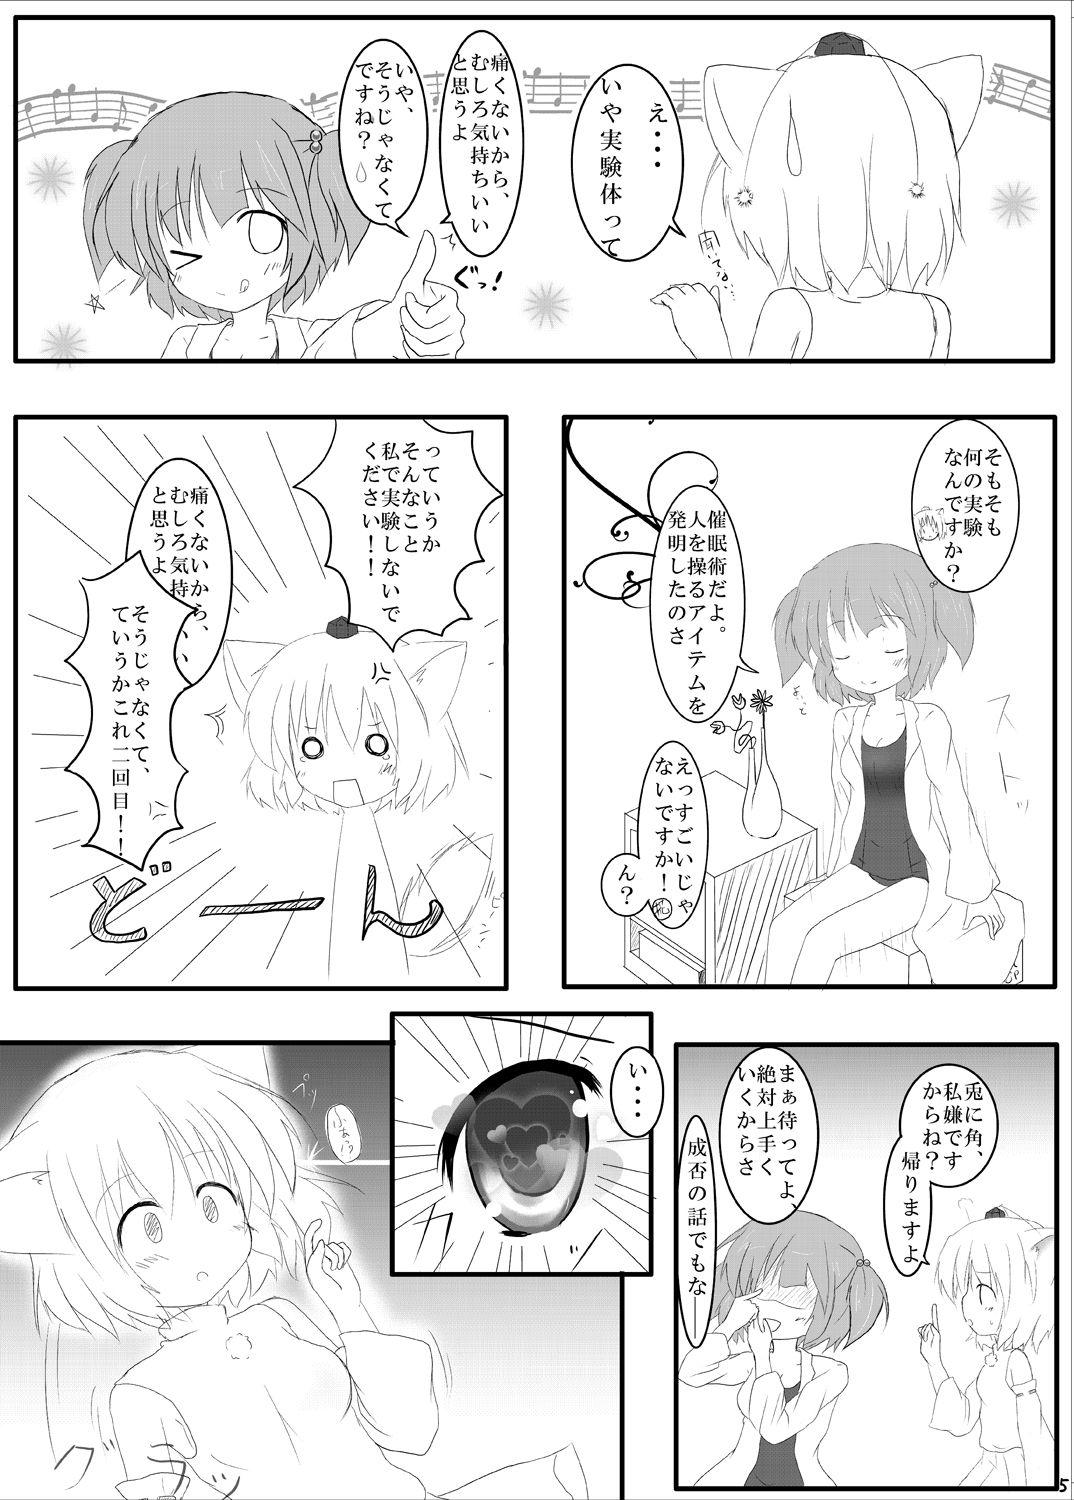 Butt Sex H na "Me" ni Acchatta! - Touhou project Exgf - Page 4